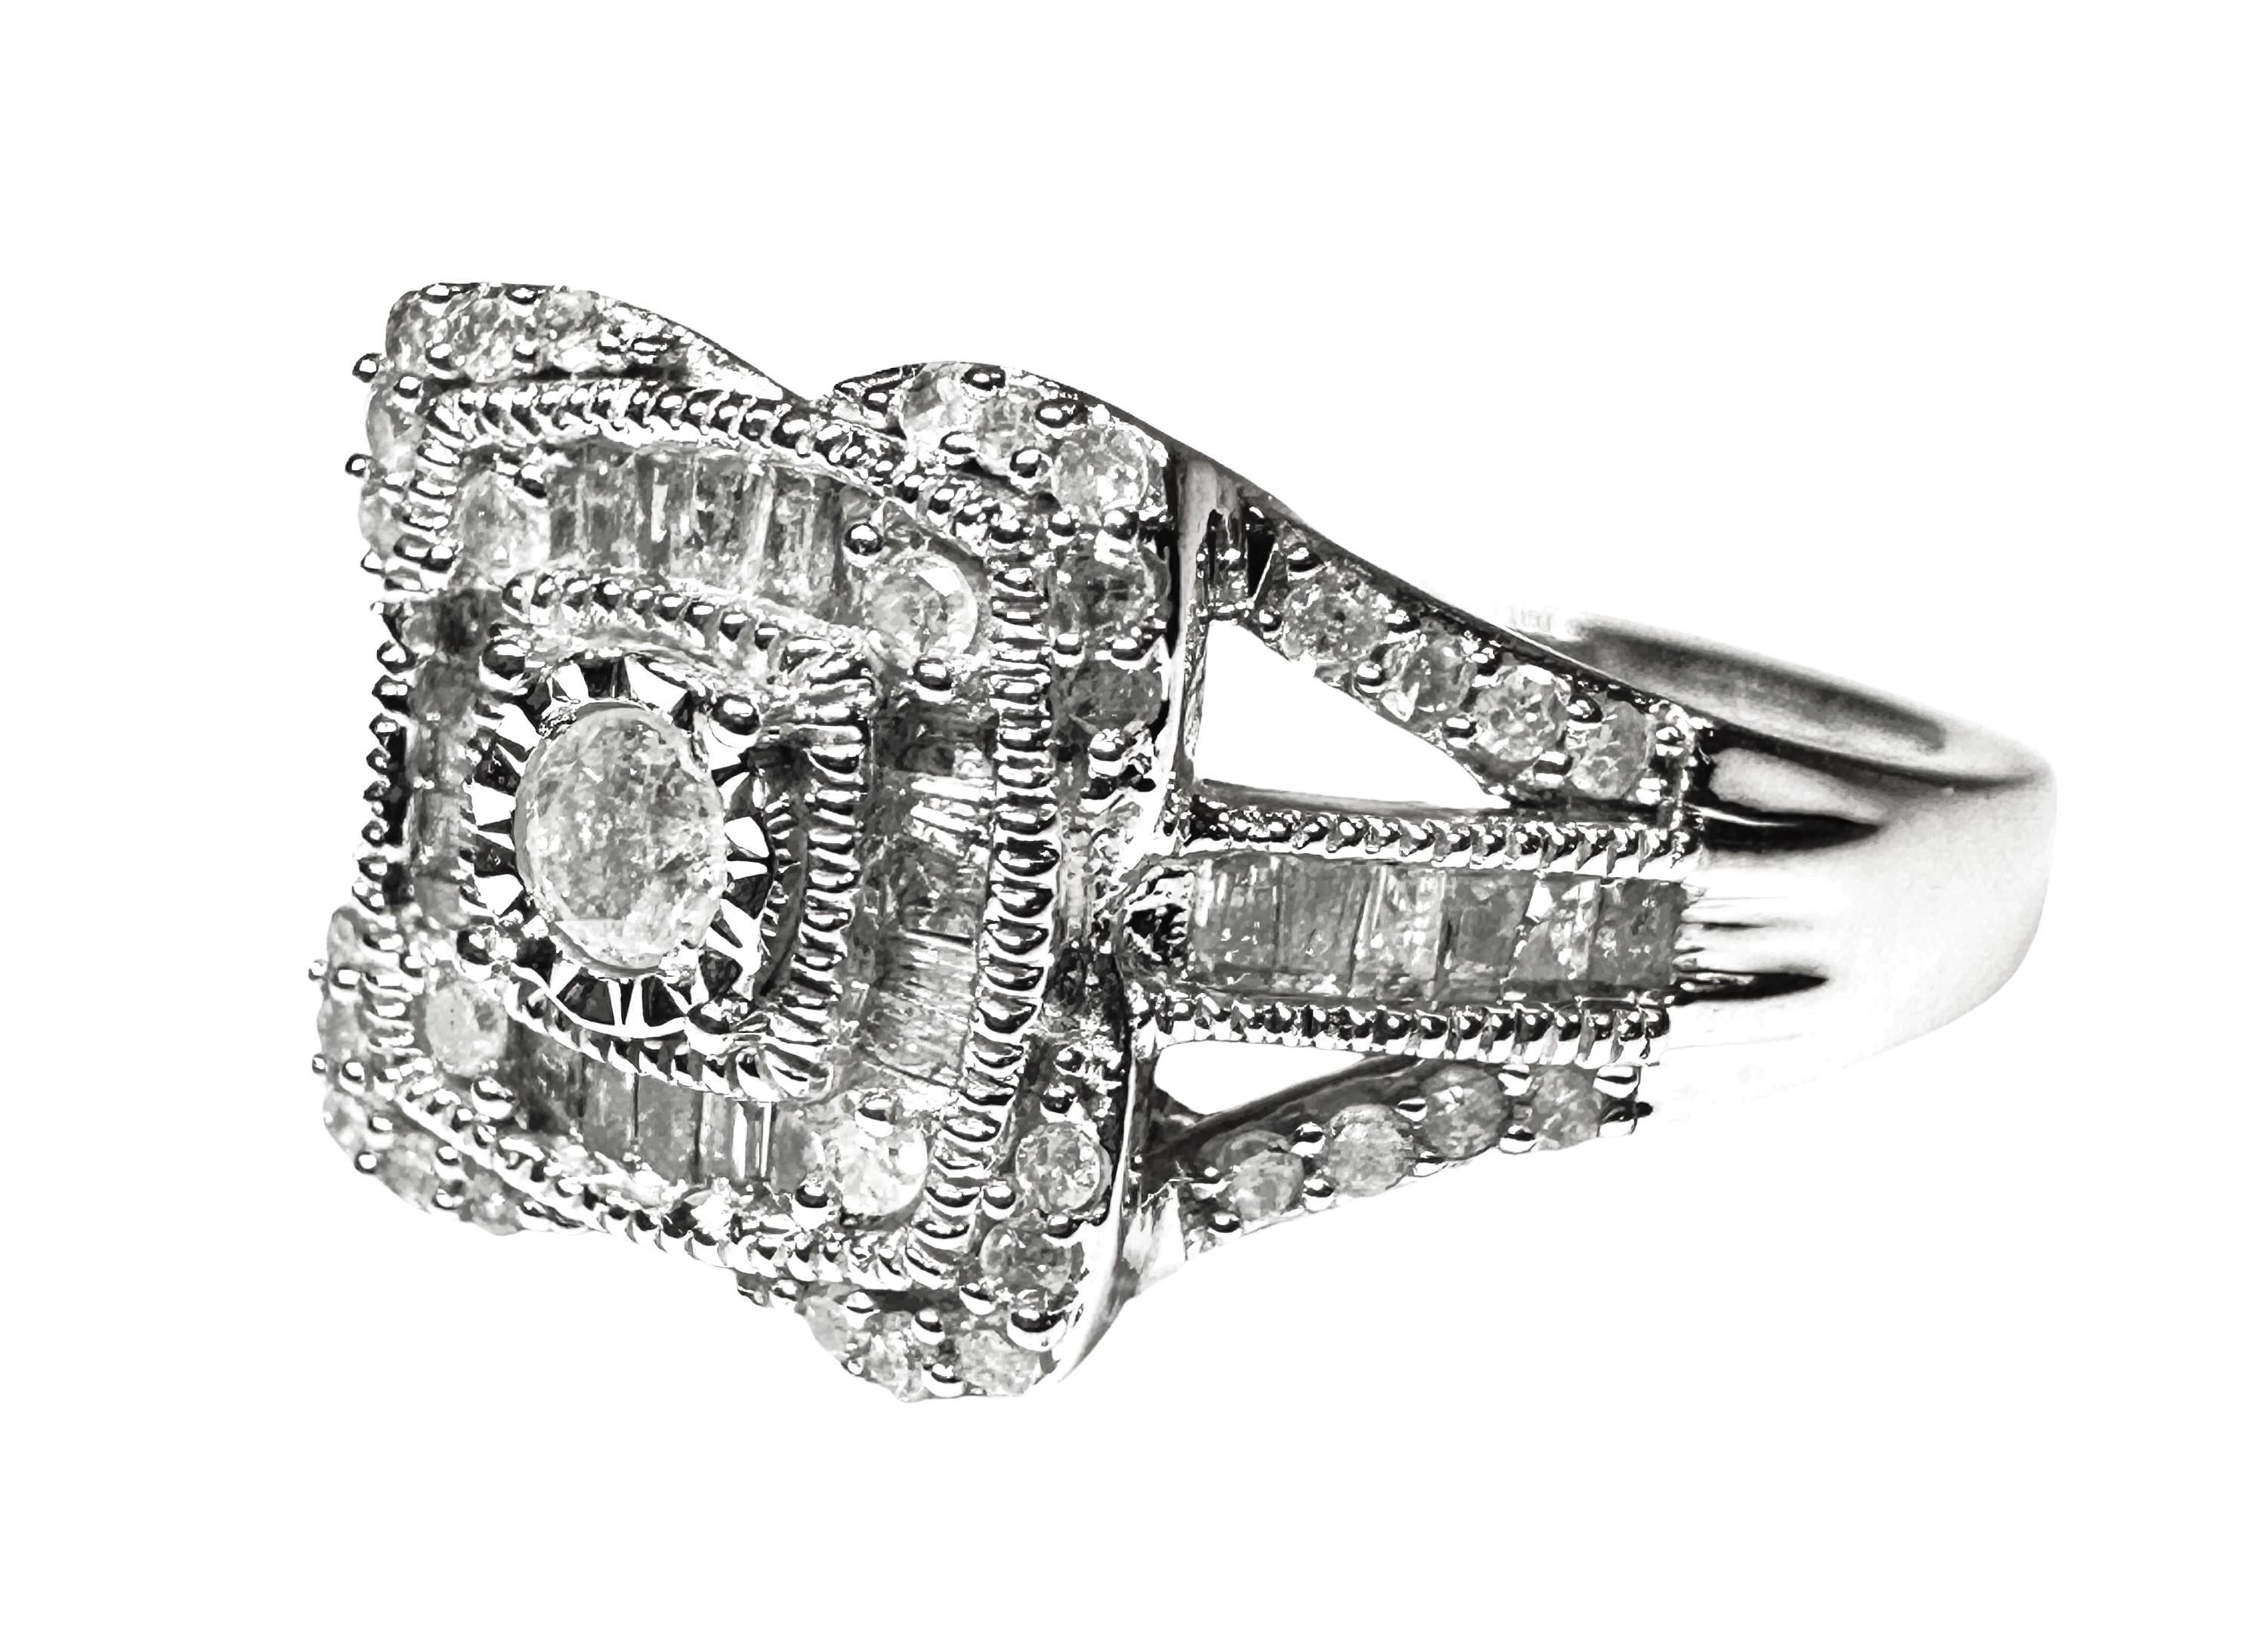 Baguette Cut New 10k WG Vintage 1 carat Diamond Ring Size 7with Appraisal For Sale